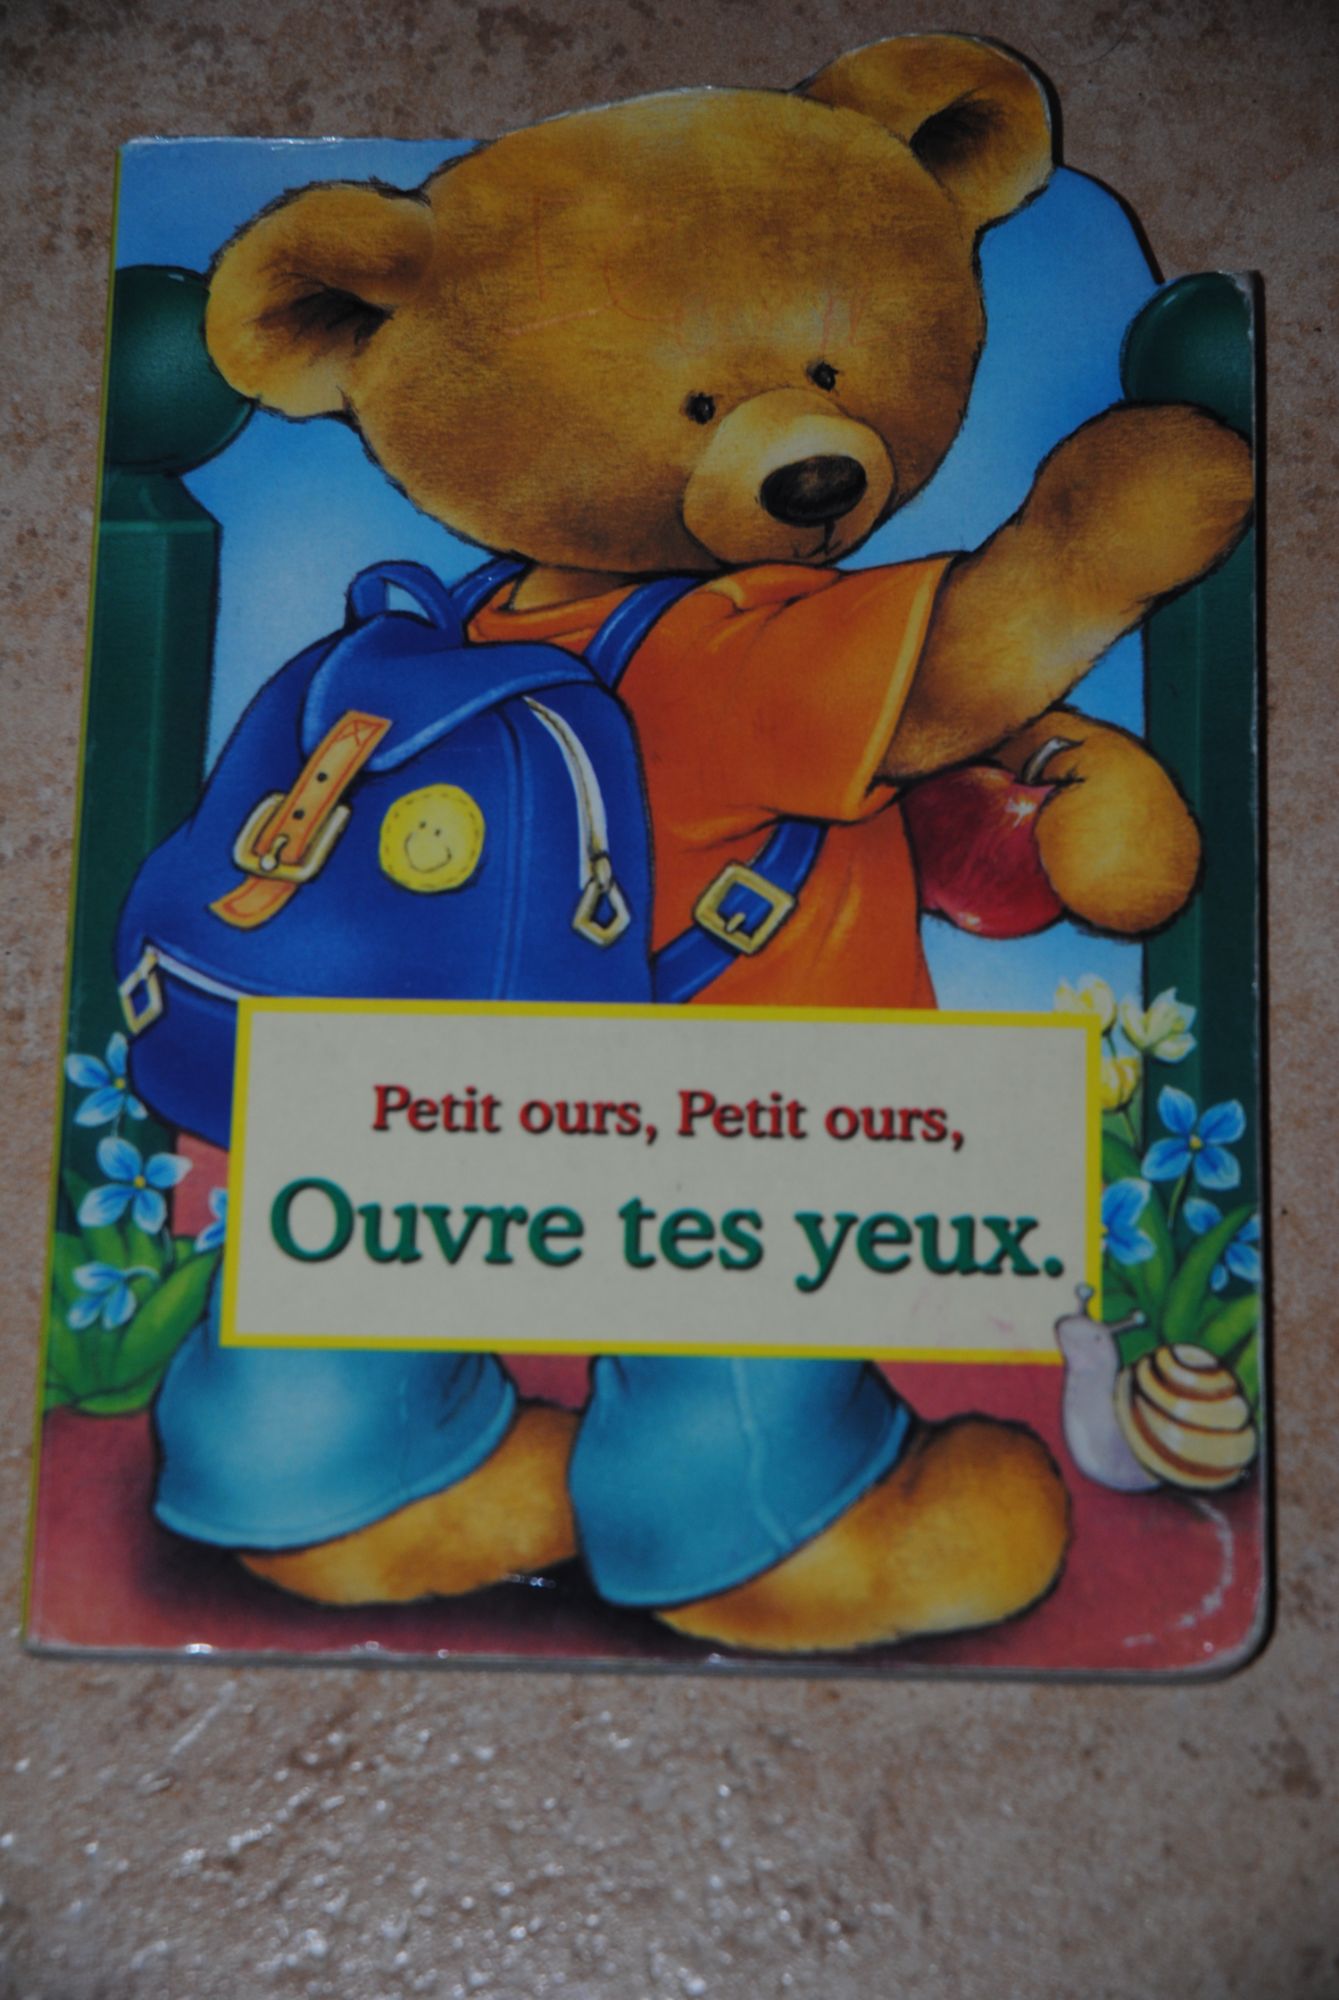 Petit ours, Petit ours; ouvre tes yeux